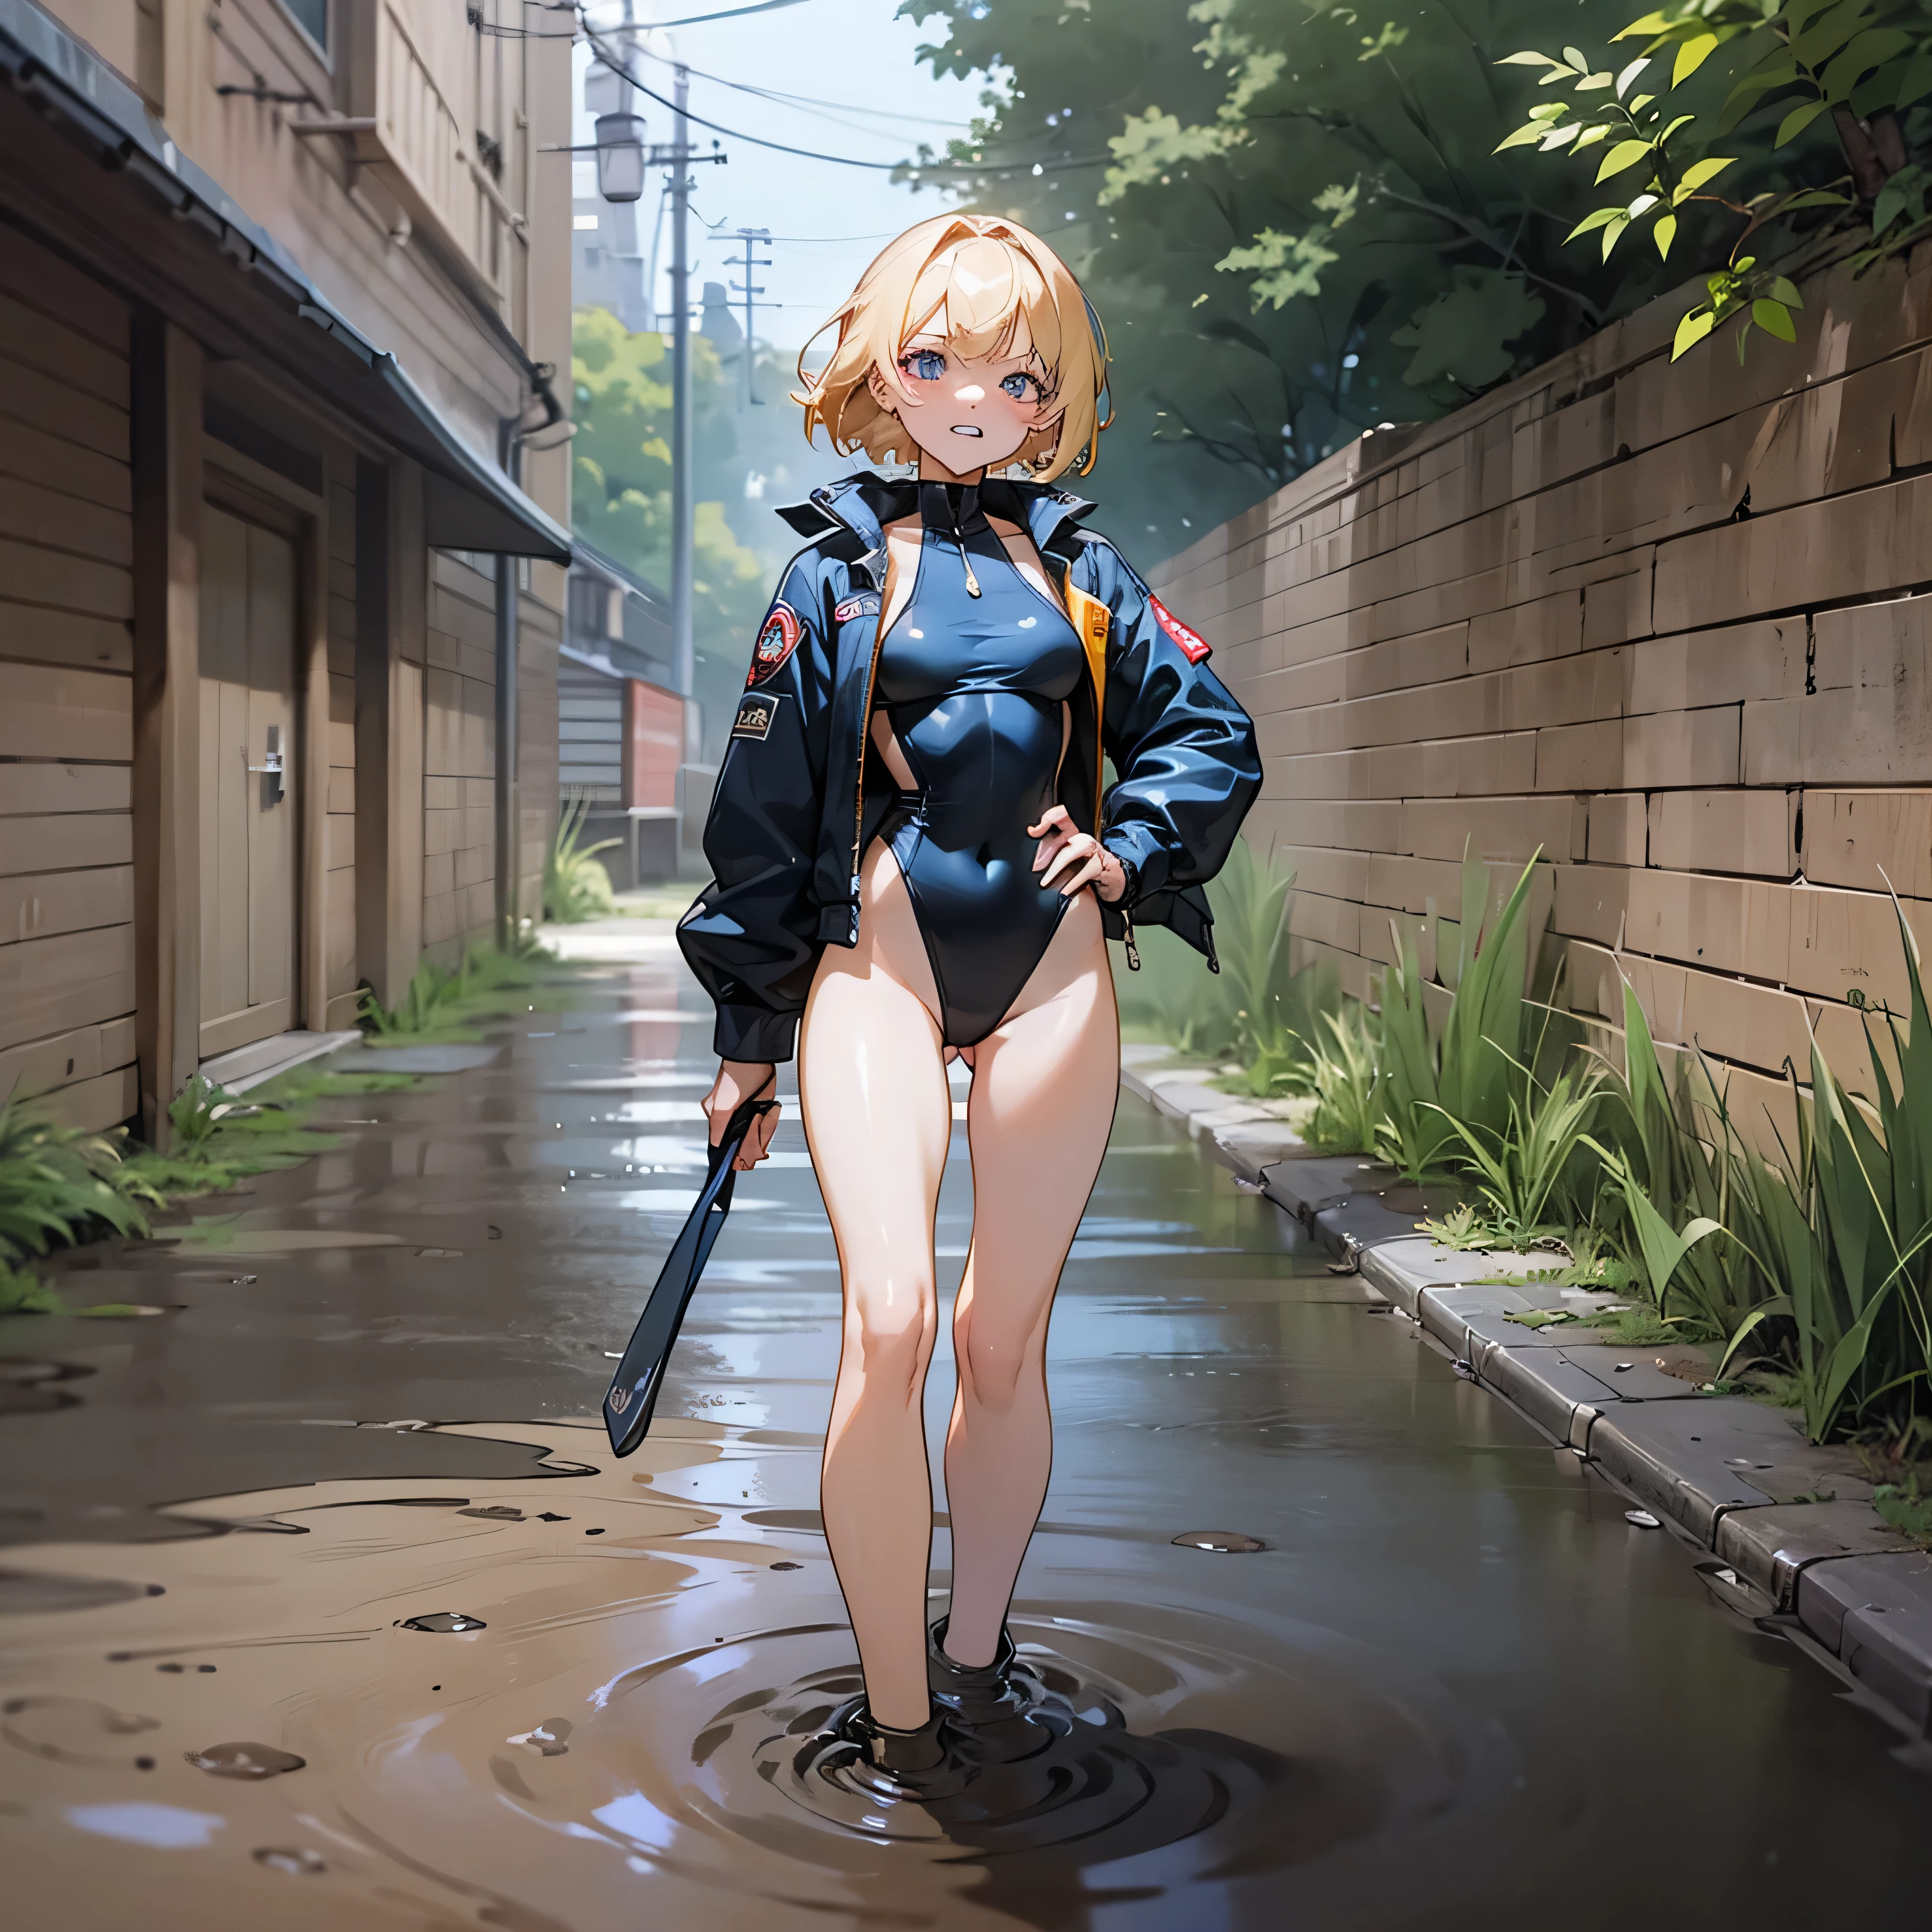 An attractive young woman standing in a small crack in the footpath filled with tar, up to her knees in tar, sinking in tar, wearing a leotard and a jacket, looking down, gritted teeth, worried look, short blond hair, pulling at legs, hips and legs twisting and flexing, tar is black and sticky, tar clings to her shoes and legs,